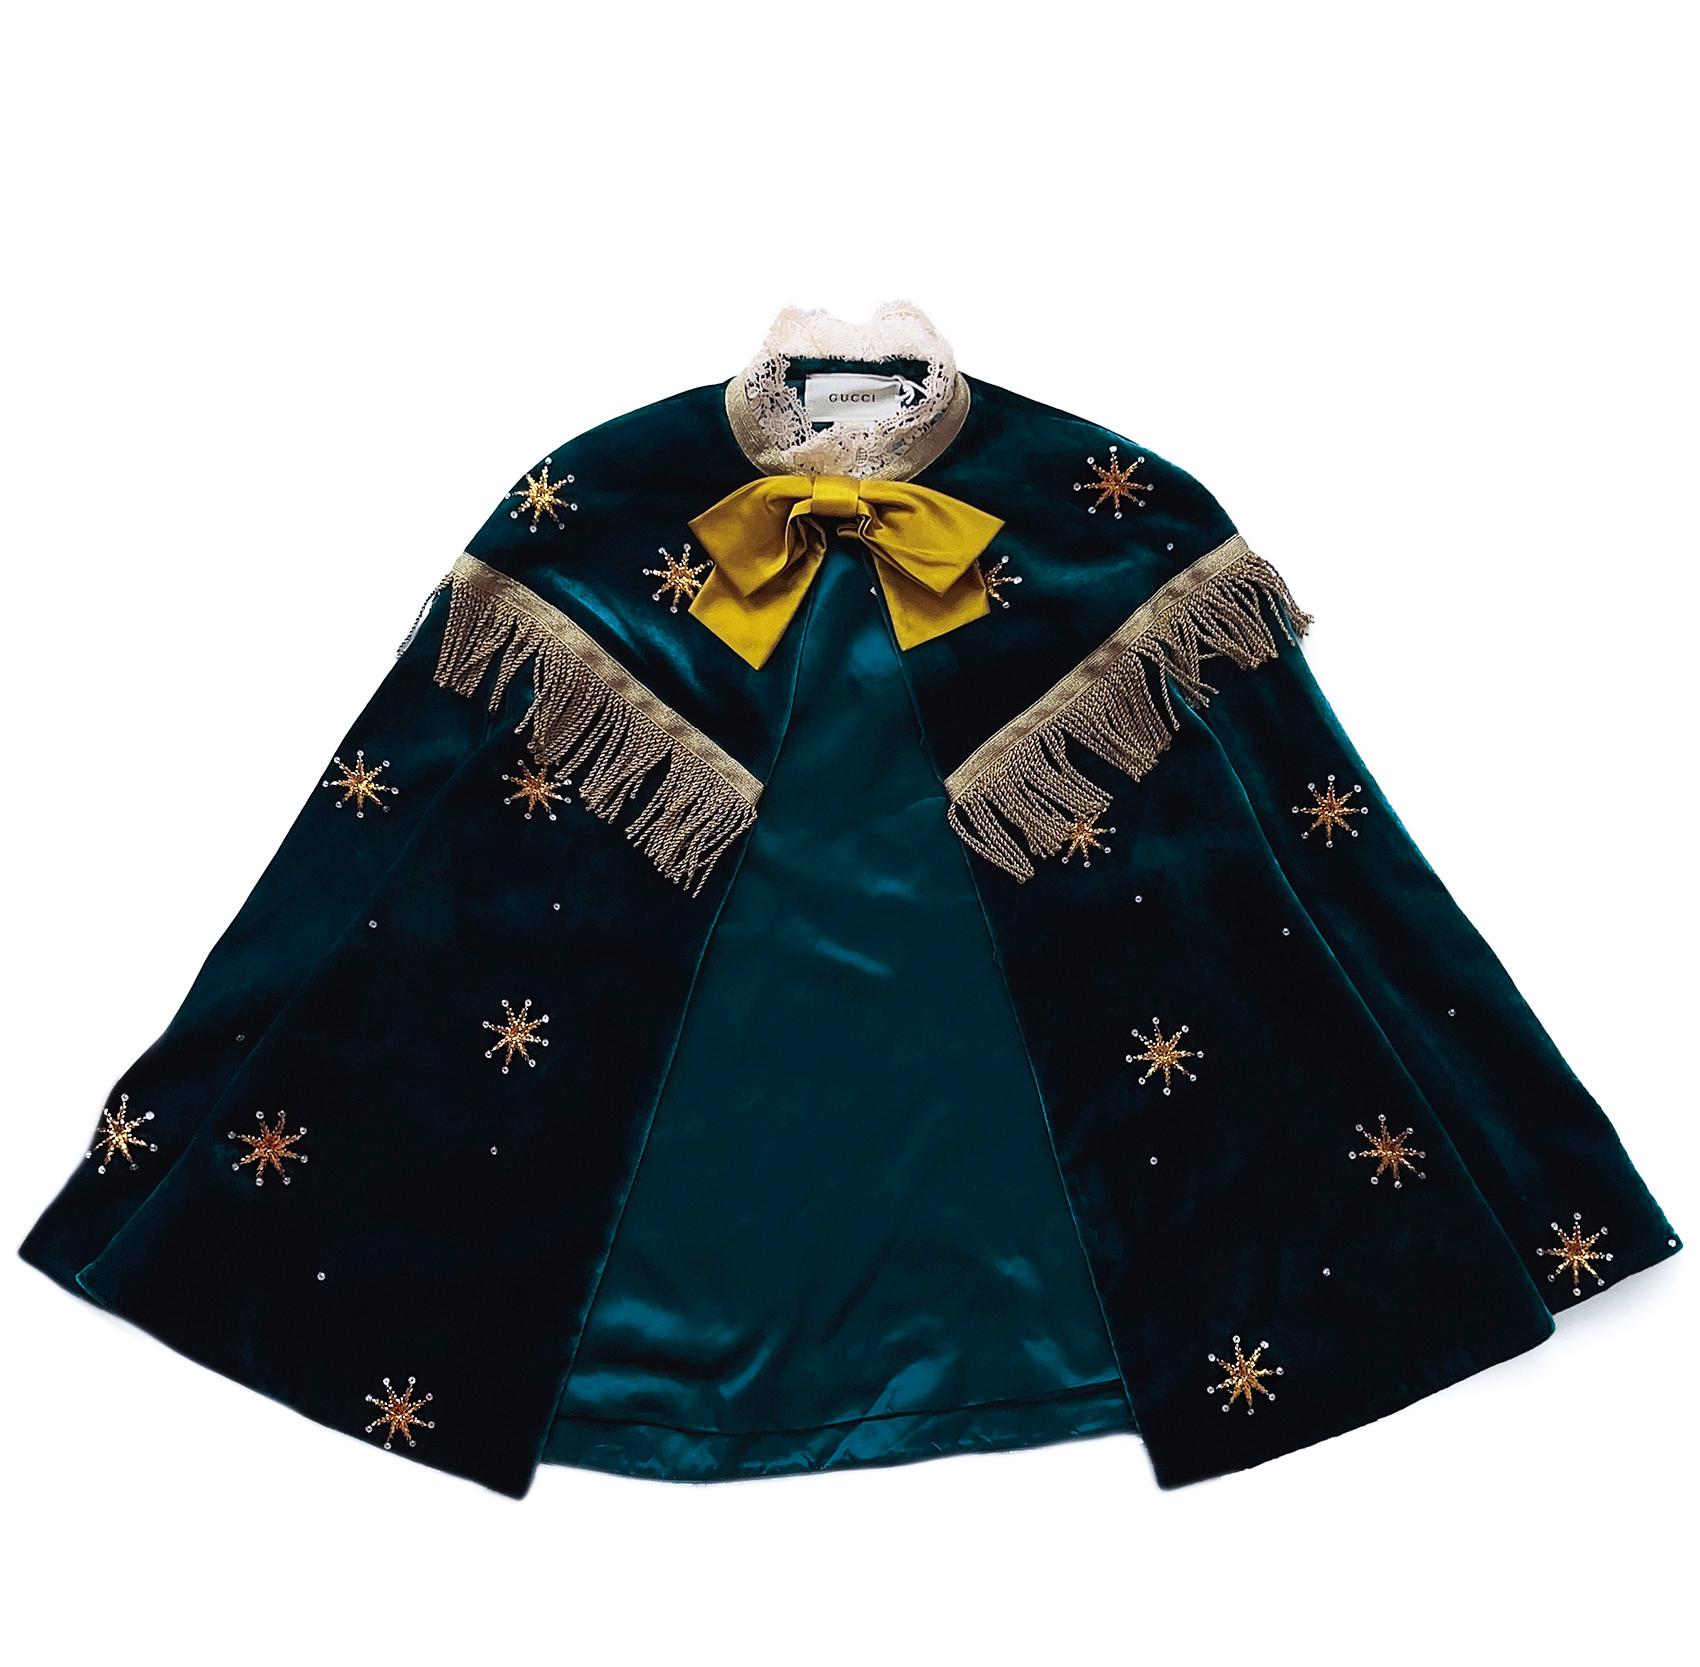 
Father, Son and House of Gucci <3

So obsessed with this gorgeous SHOWSTOPPER piece!
Rare and so beautiful GUCCI silk velvet Cape, new with tag.
Dark teal velvet with the most amazing lavish embellishment. Gold tassles, rhinestones and glitter lamé